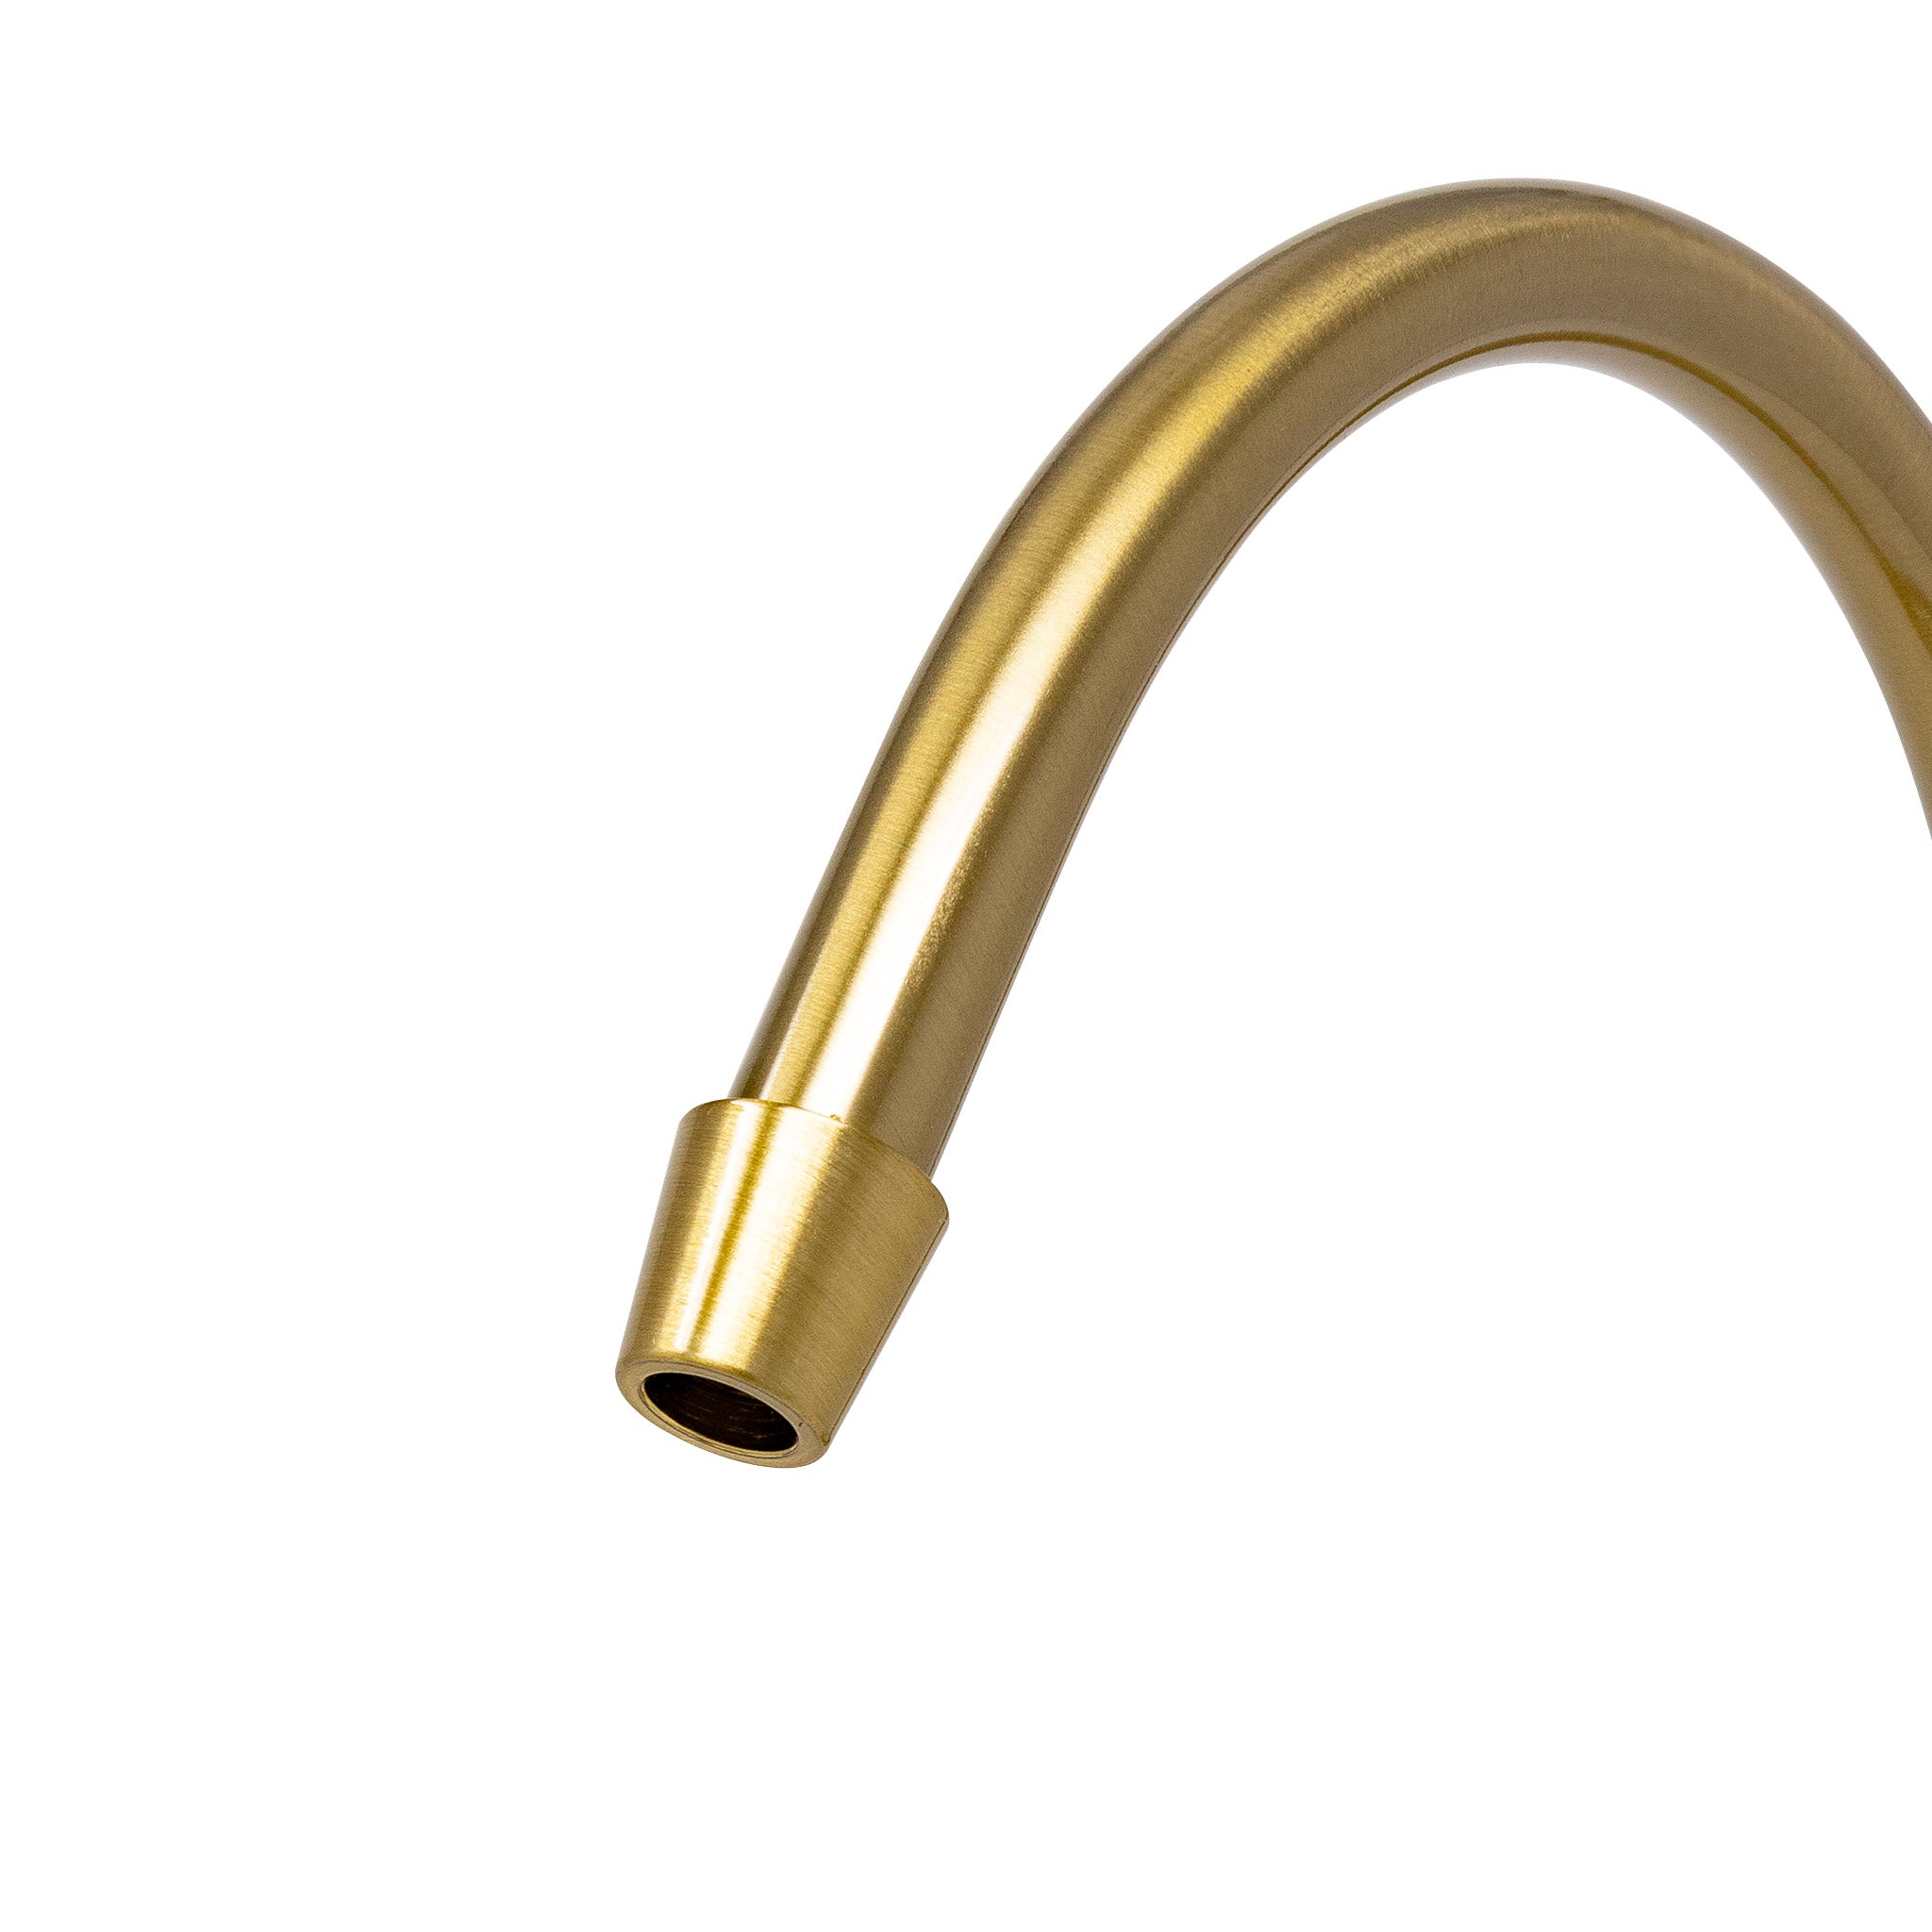 Water Filtration Faucet Brushed Gold Euro Style Reverse Osmosis Non Air Gap. Certified by NSF.